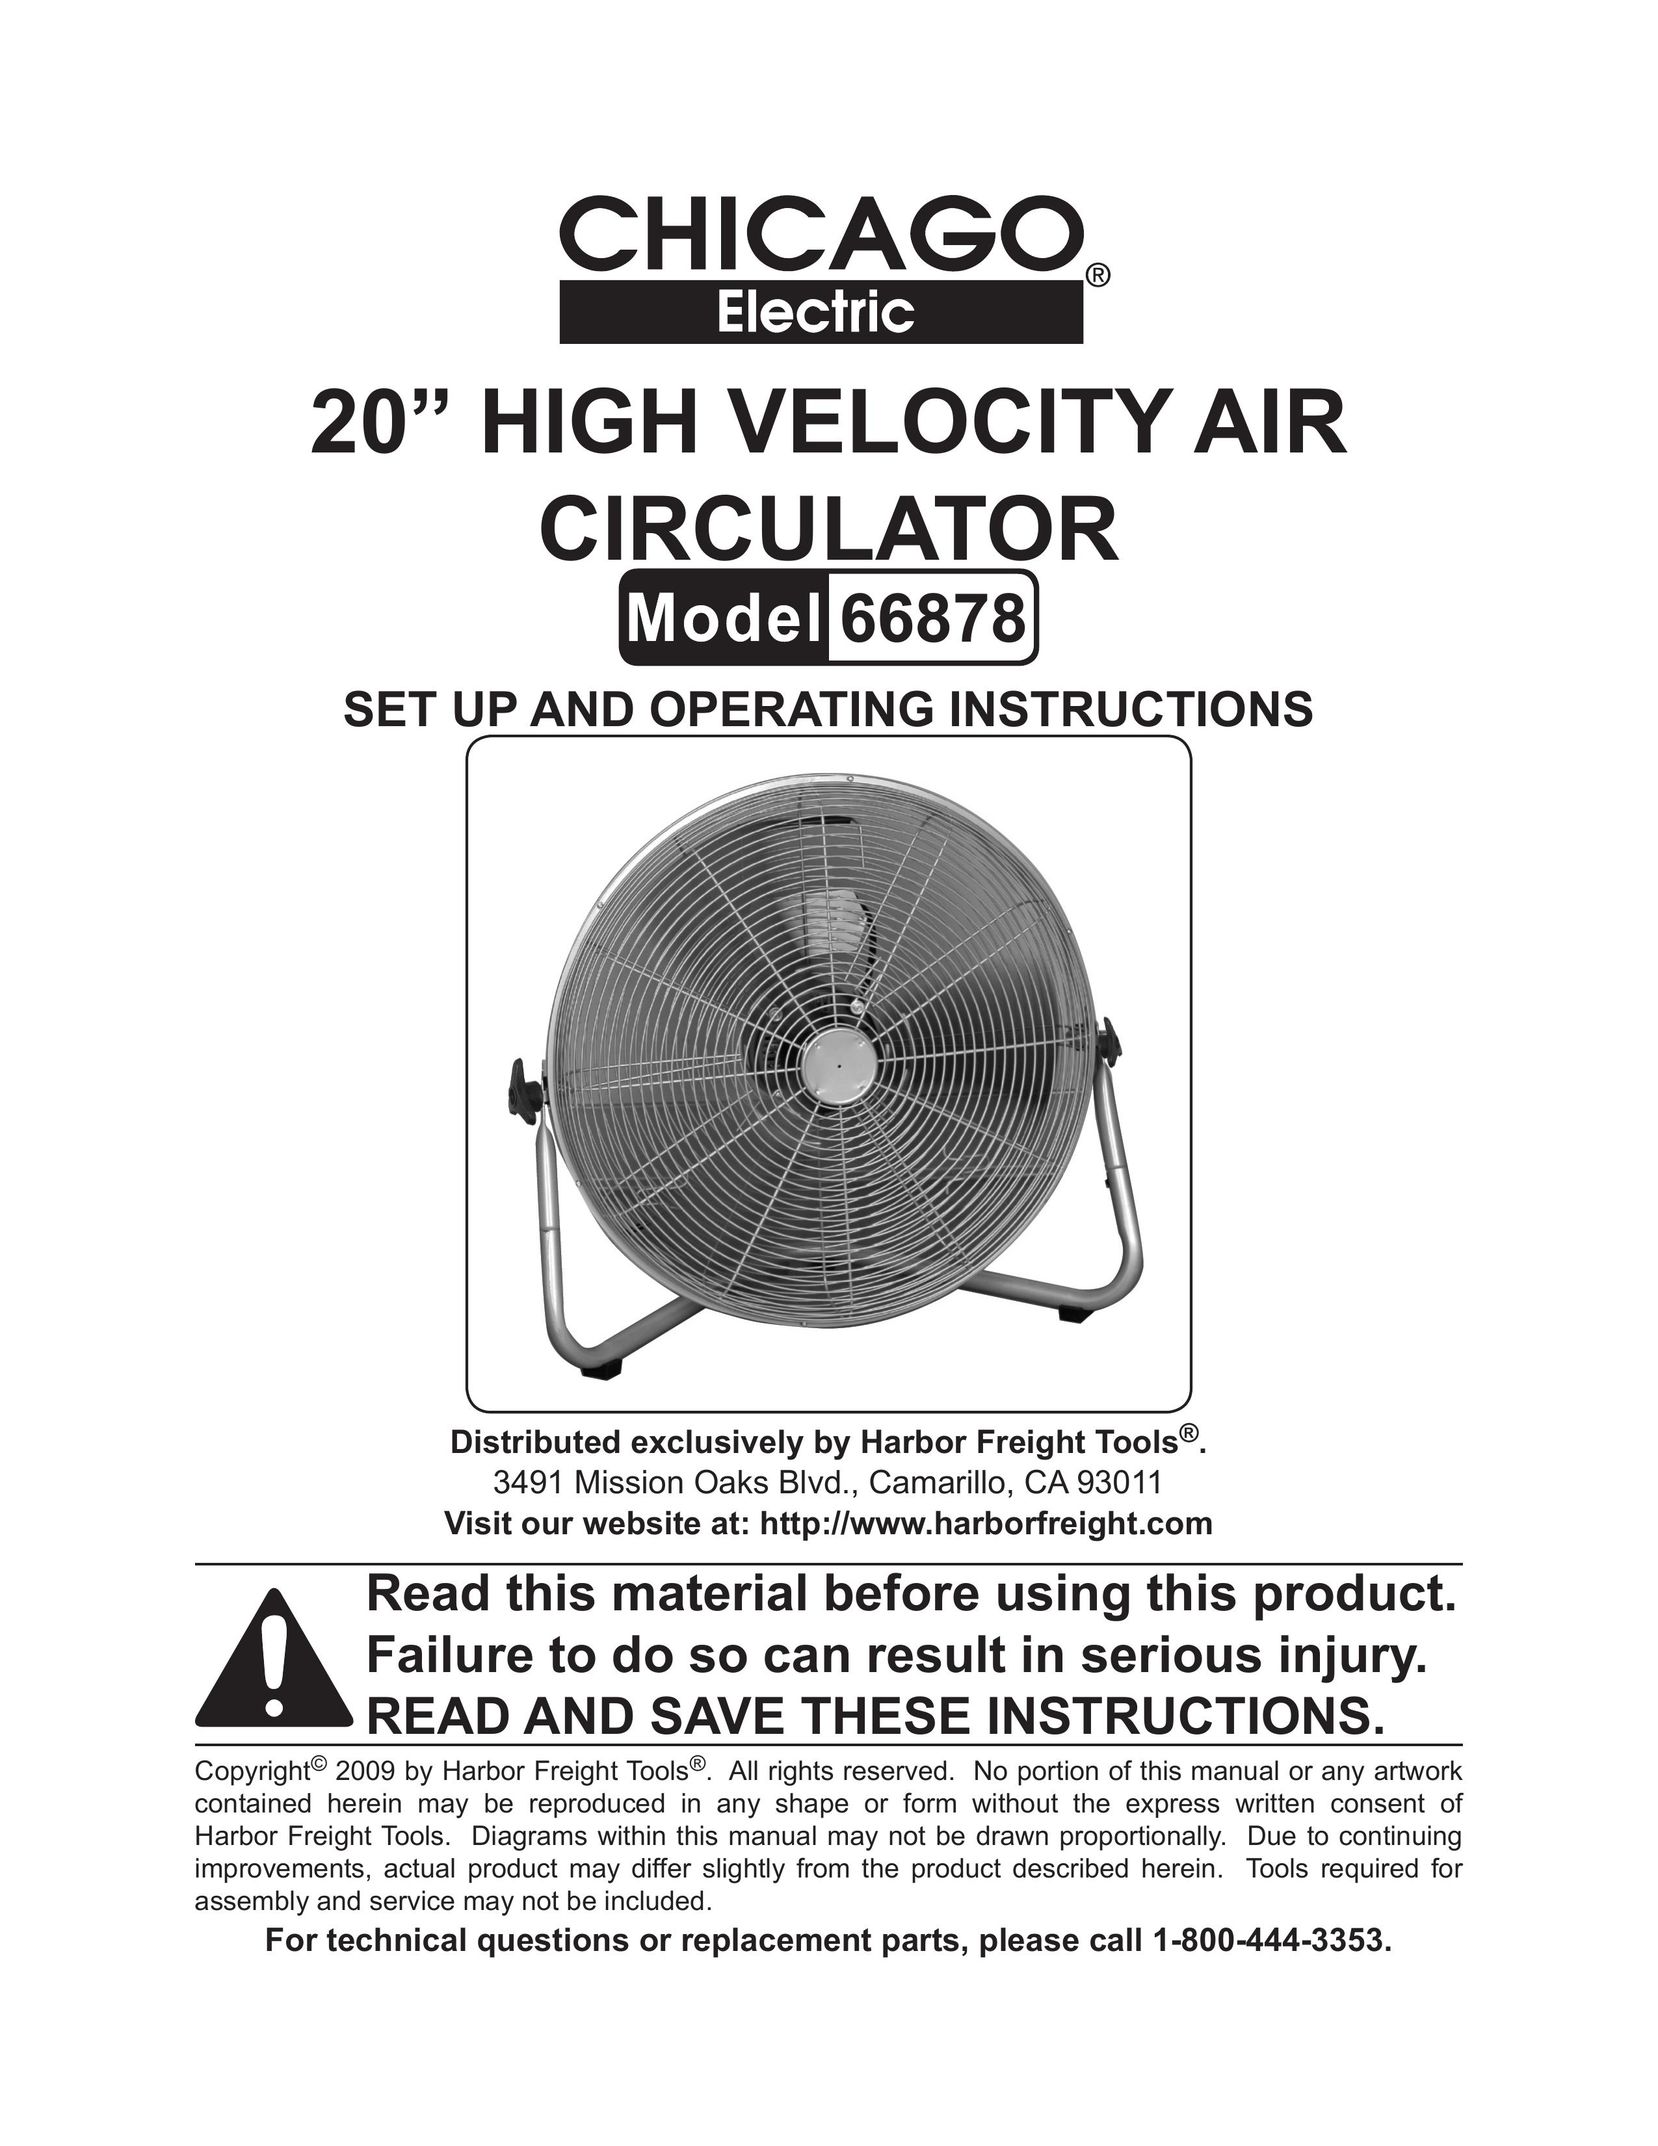 Chicago Electric 66878 Fan User Manual